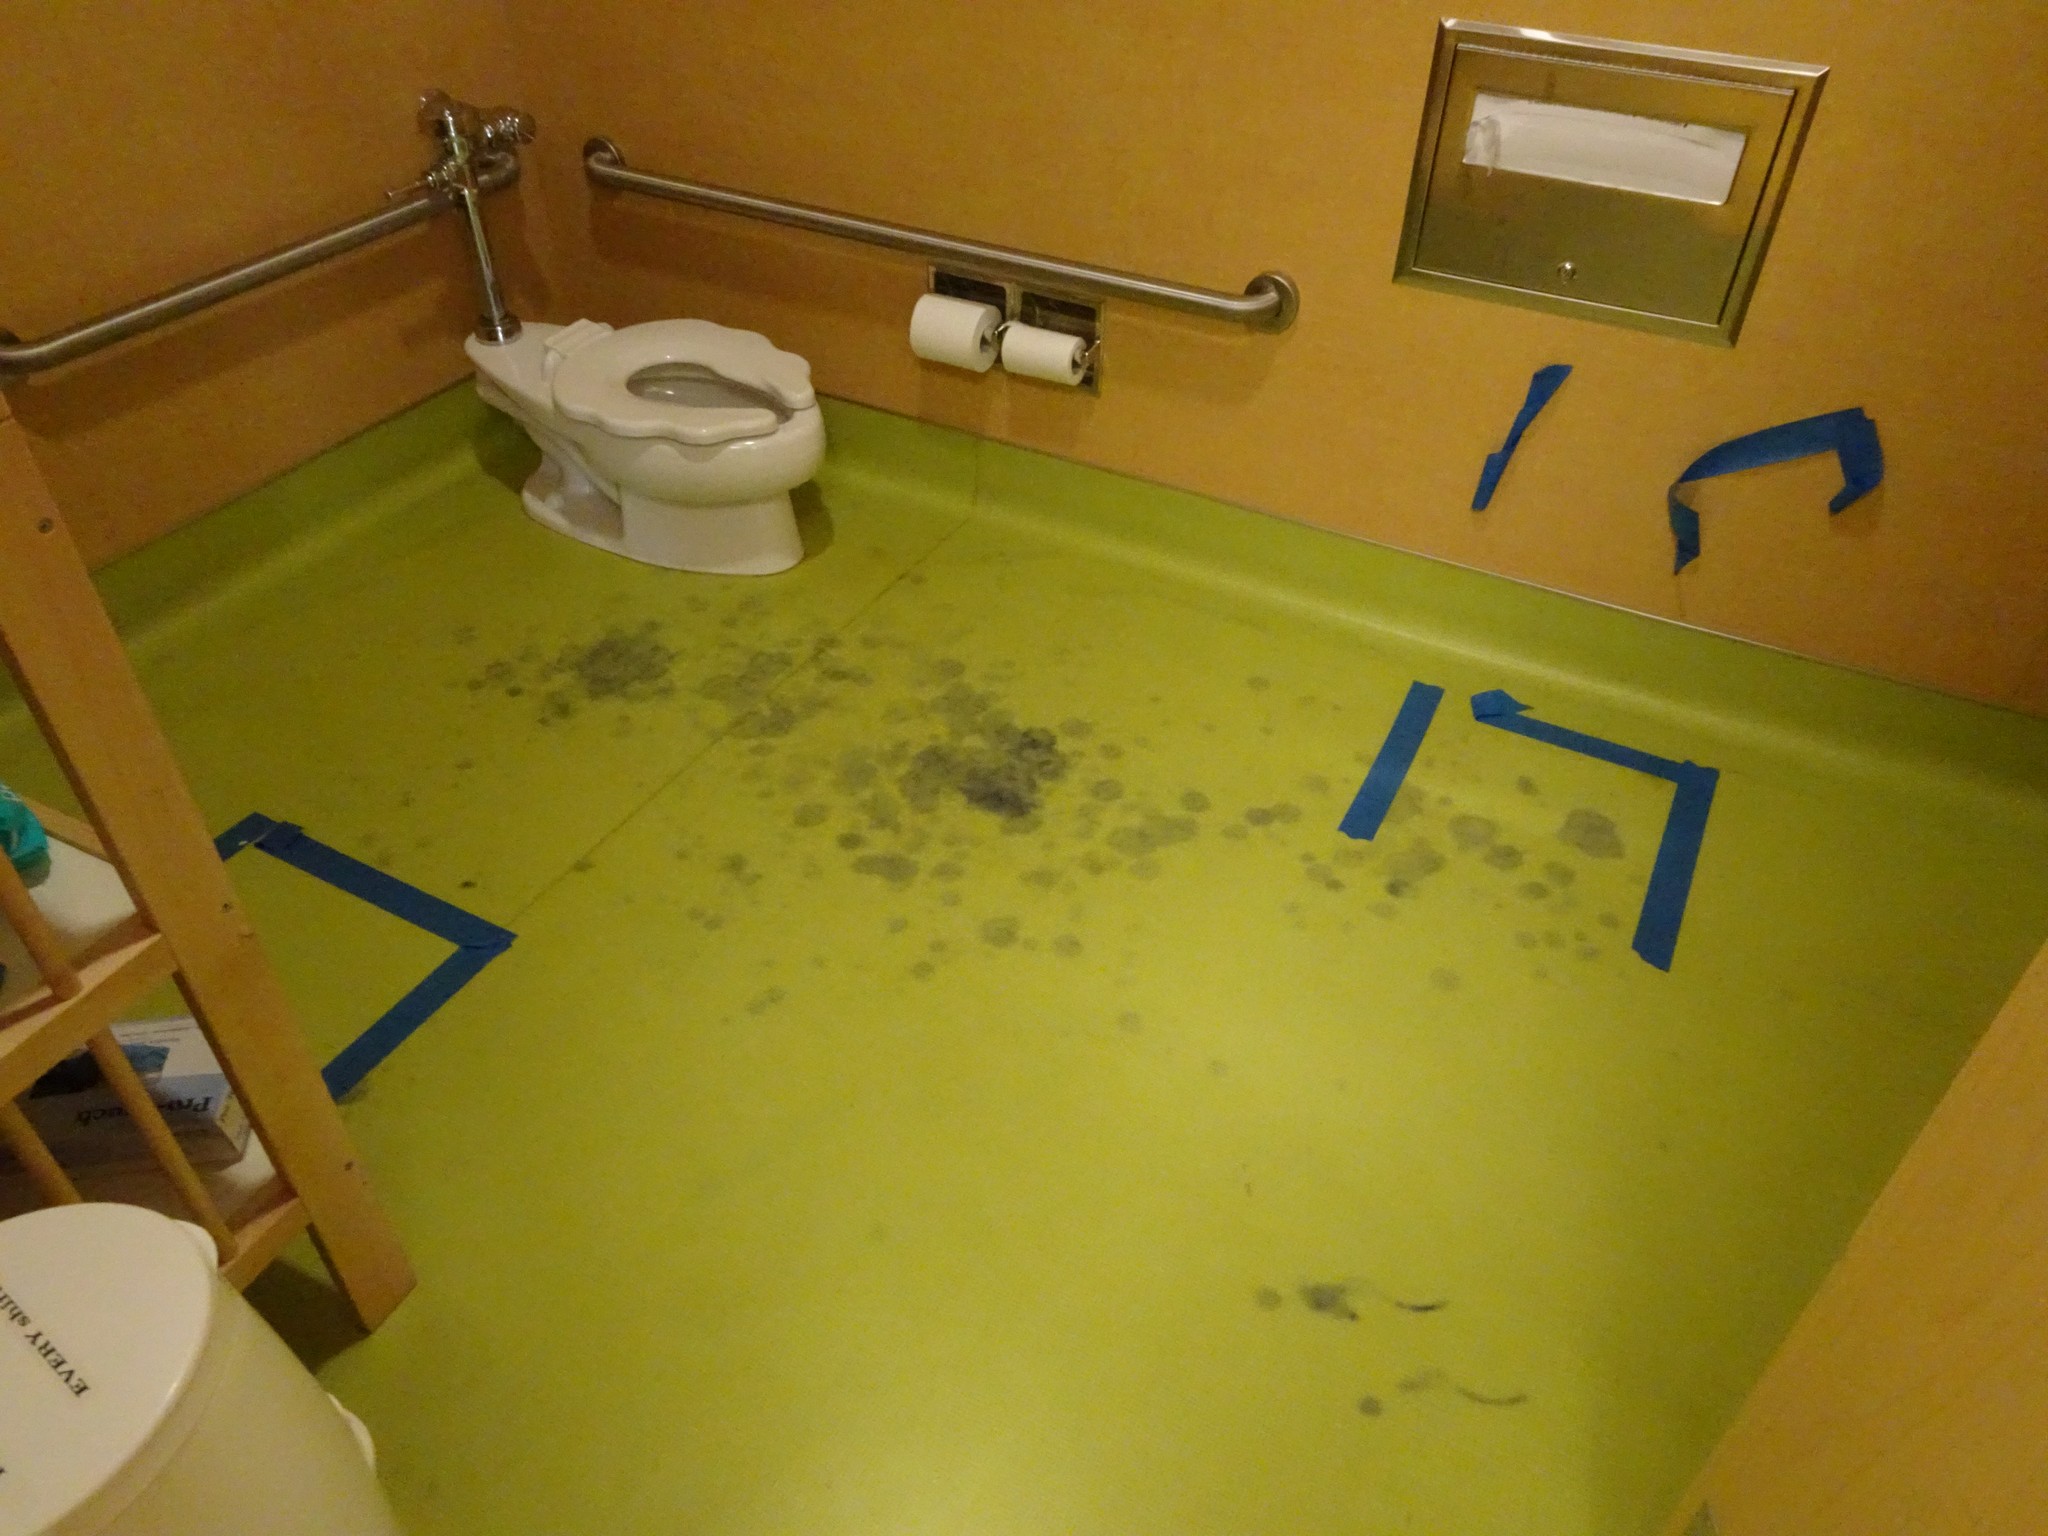 Mold growth under resilient flooring